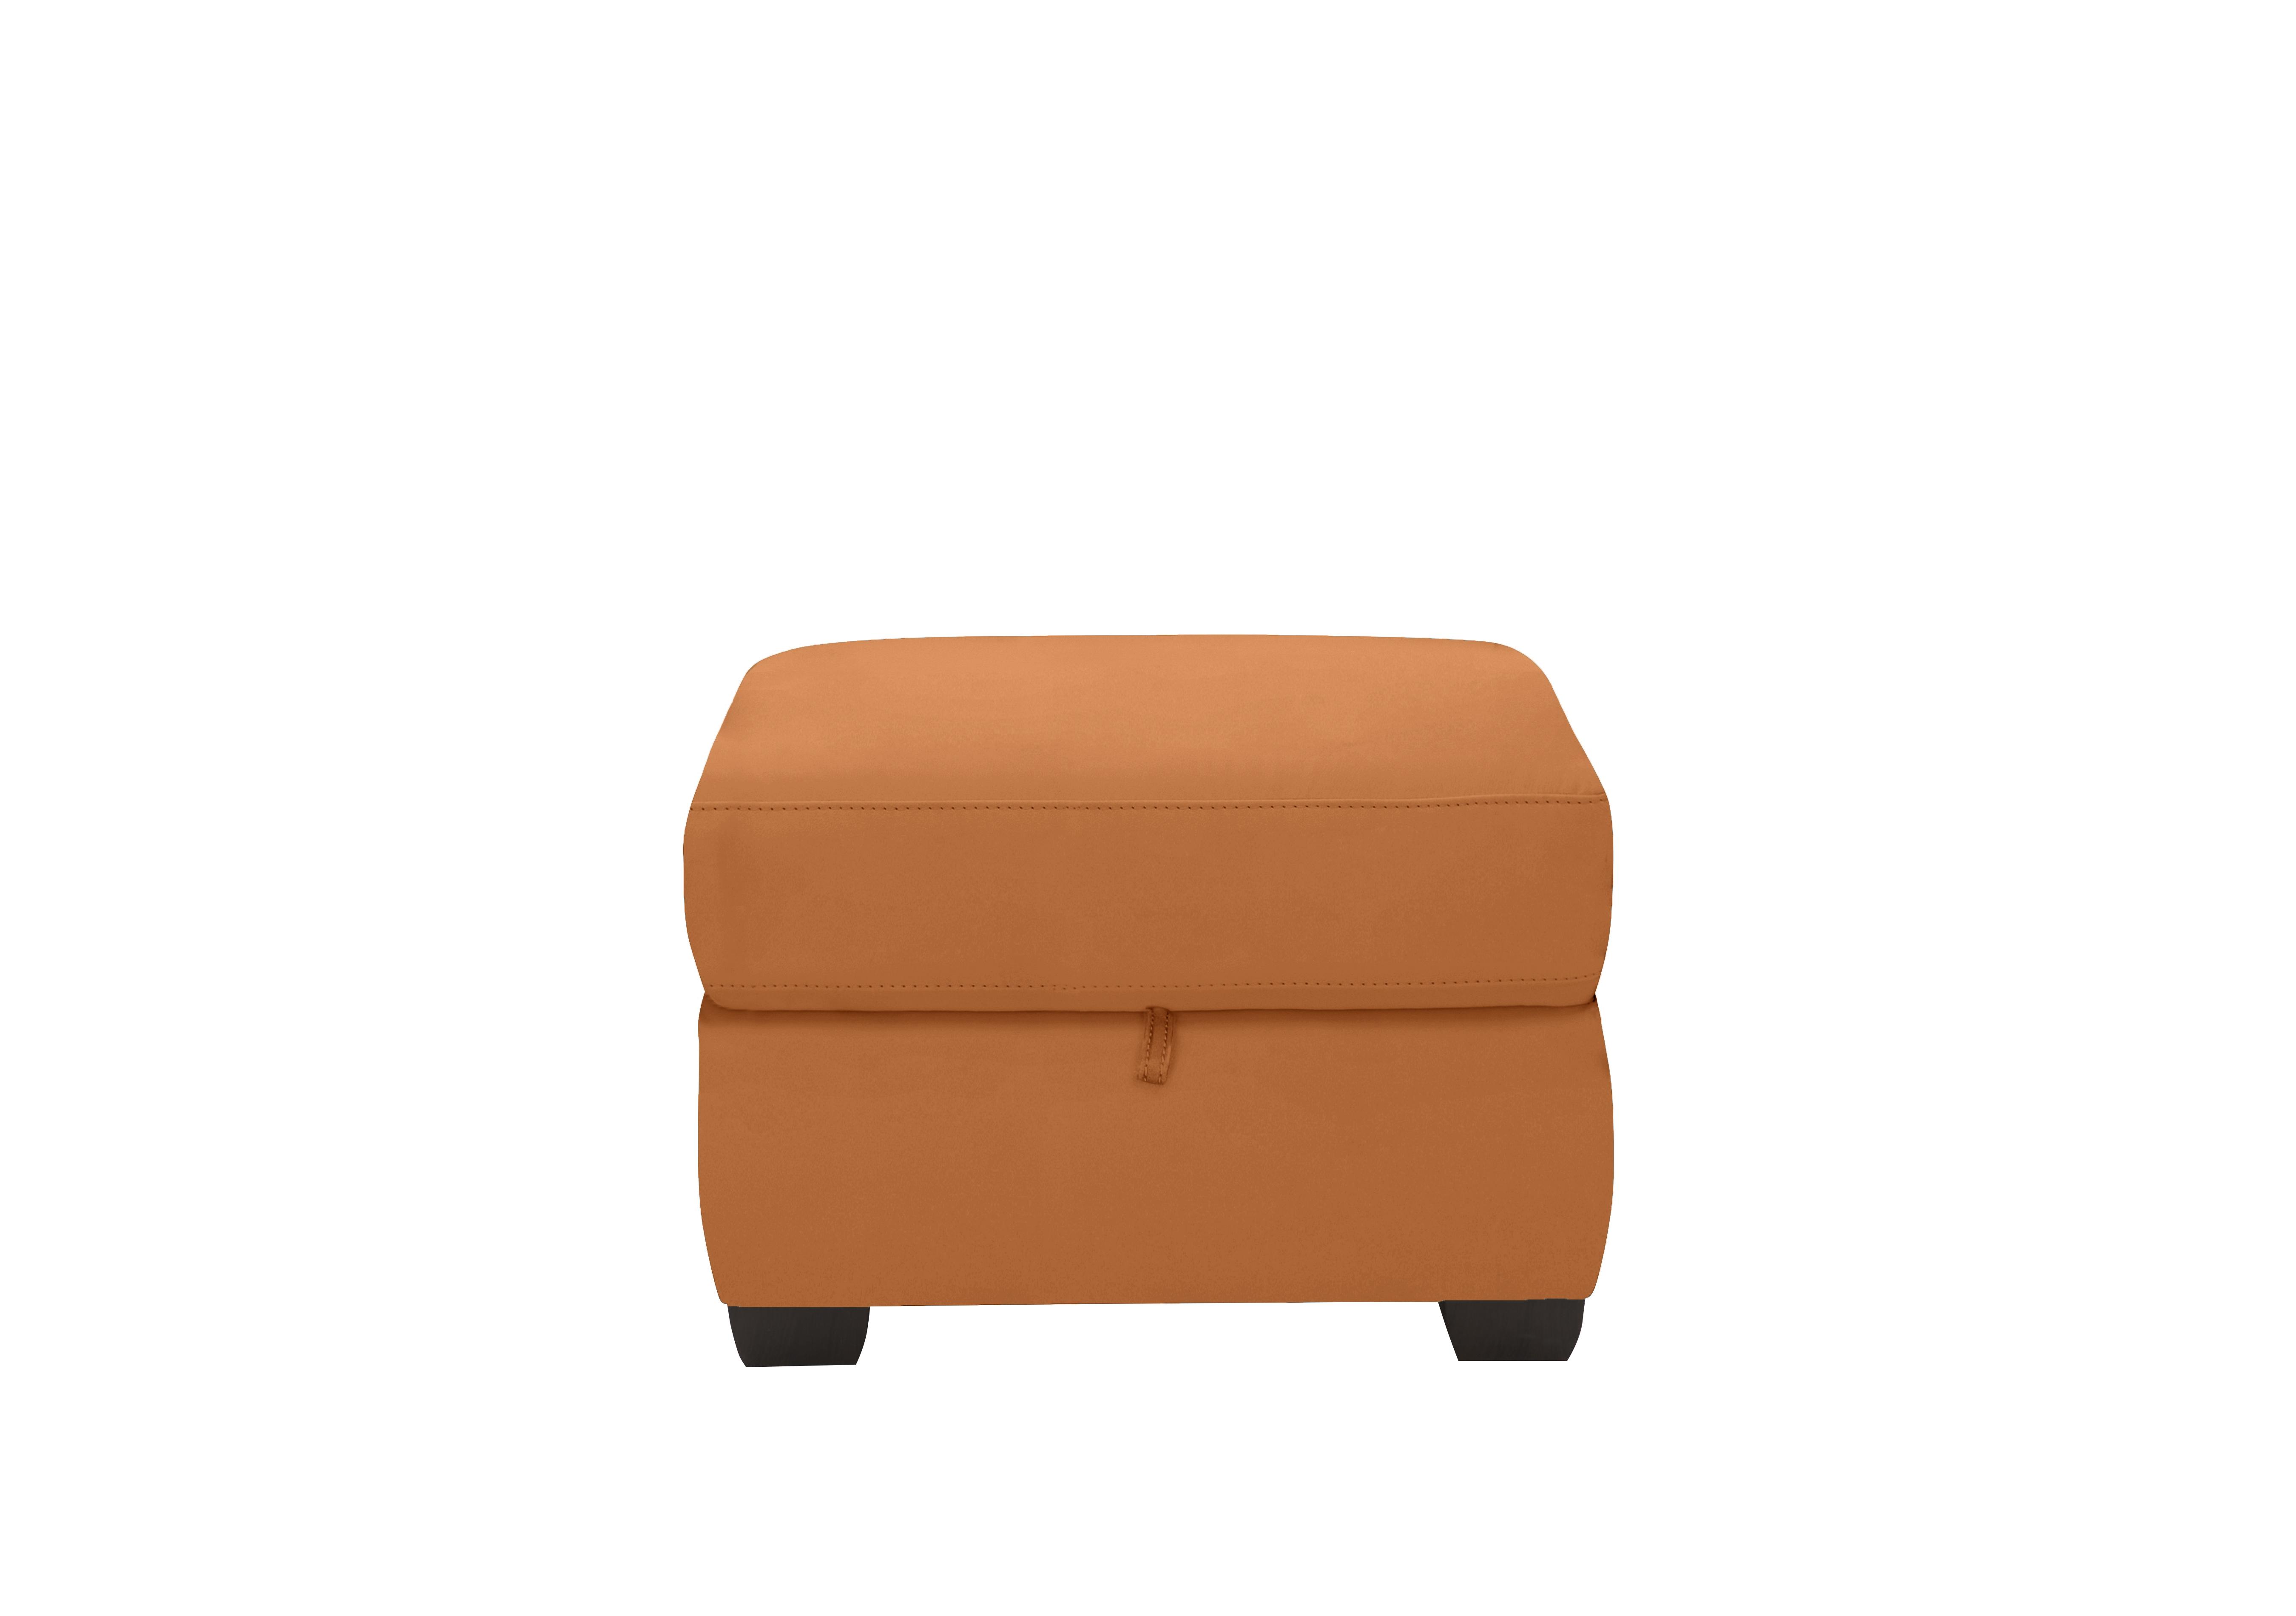 Optimus Leather Storage Footstool in Bv-335e Honey Yellow on Furniture Village